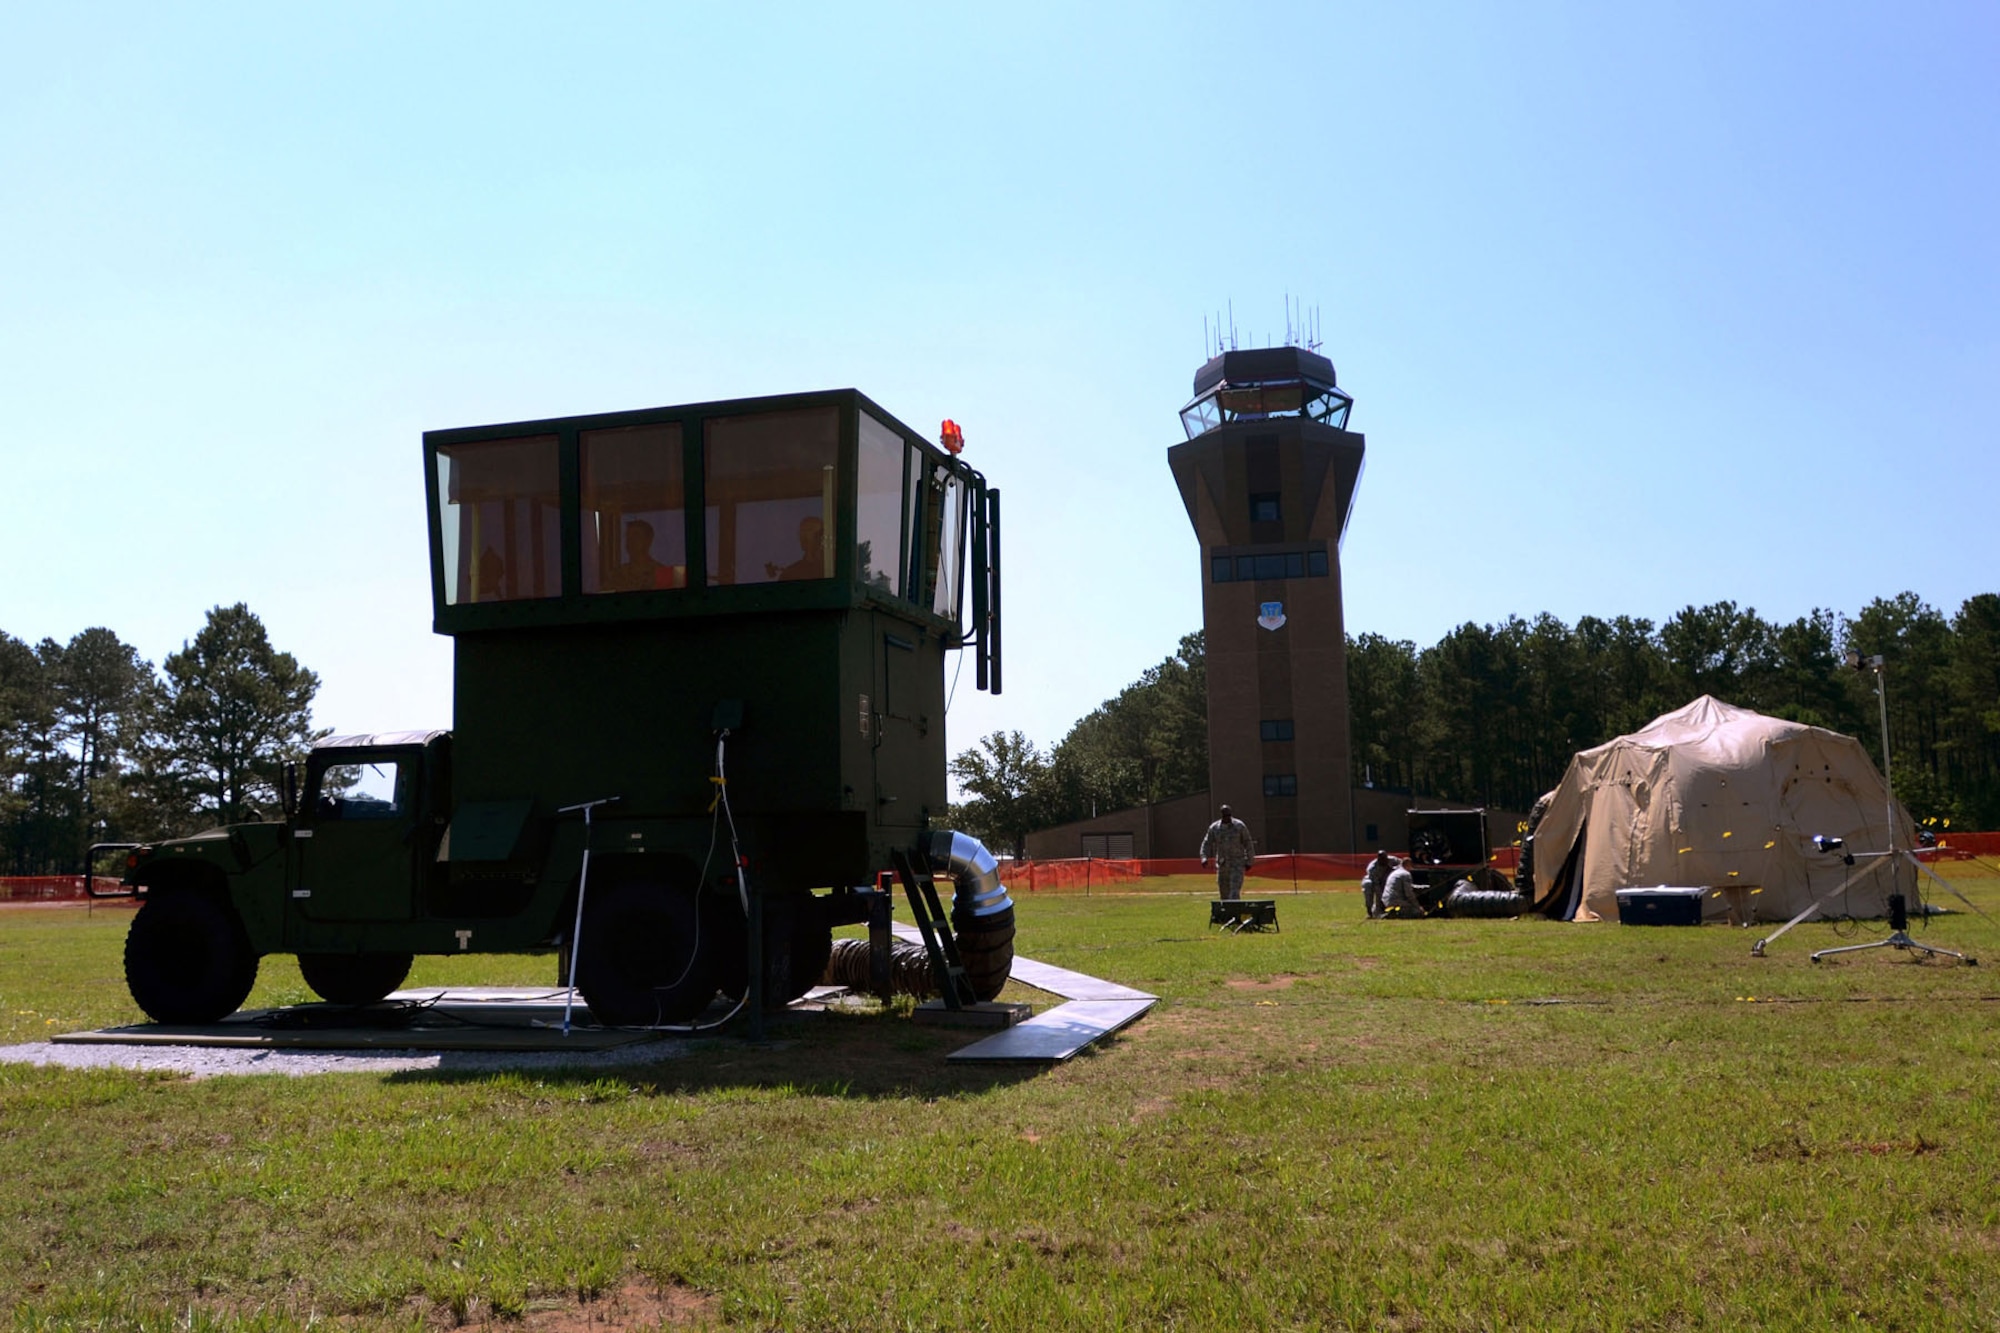 U.S. Air Force air traffic controllers with the 245th Air Traffic Control Squadron at McEntire Joint National Guard Base, South Carolina Air National Guard, work with their mobile tower at Shaw Air Force Base in Sumter, S.C., alongside personnel from the 20th Operations Support Squadron, June 13, 2013. The 245th sent a team of ATCS personnel to Shaw to set up and train Shaw's controllers on operating the mobile tower while renovations are being made to their control tower. (U.S. Air National Guard photo by Tech. Sgt. Caycee Watson/Released)